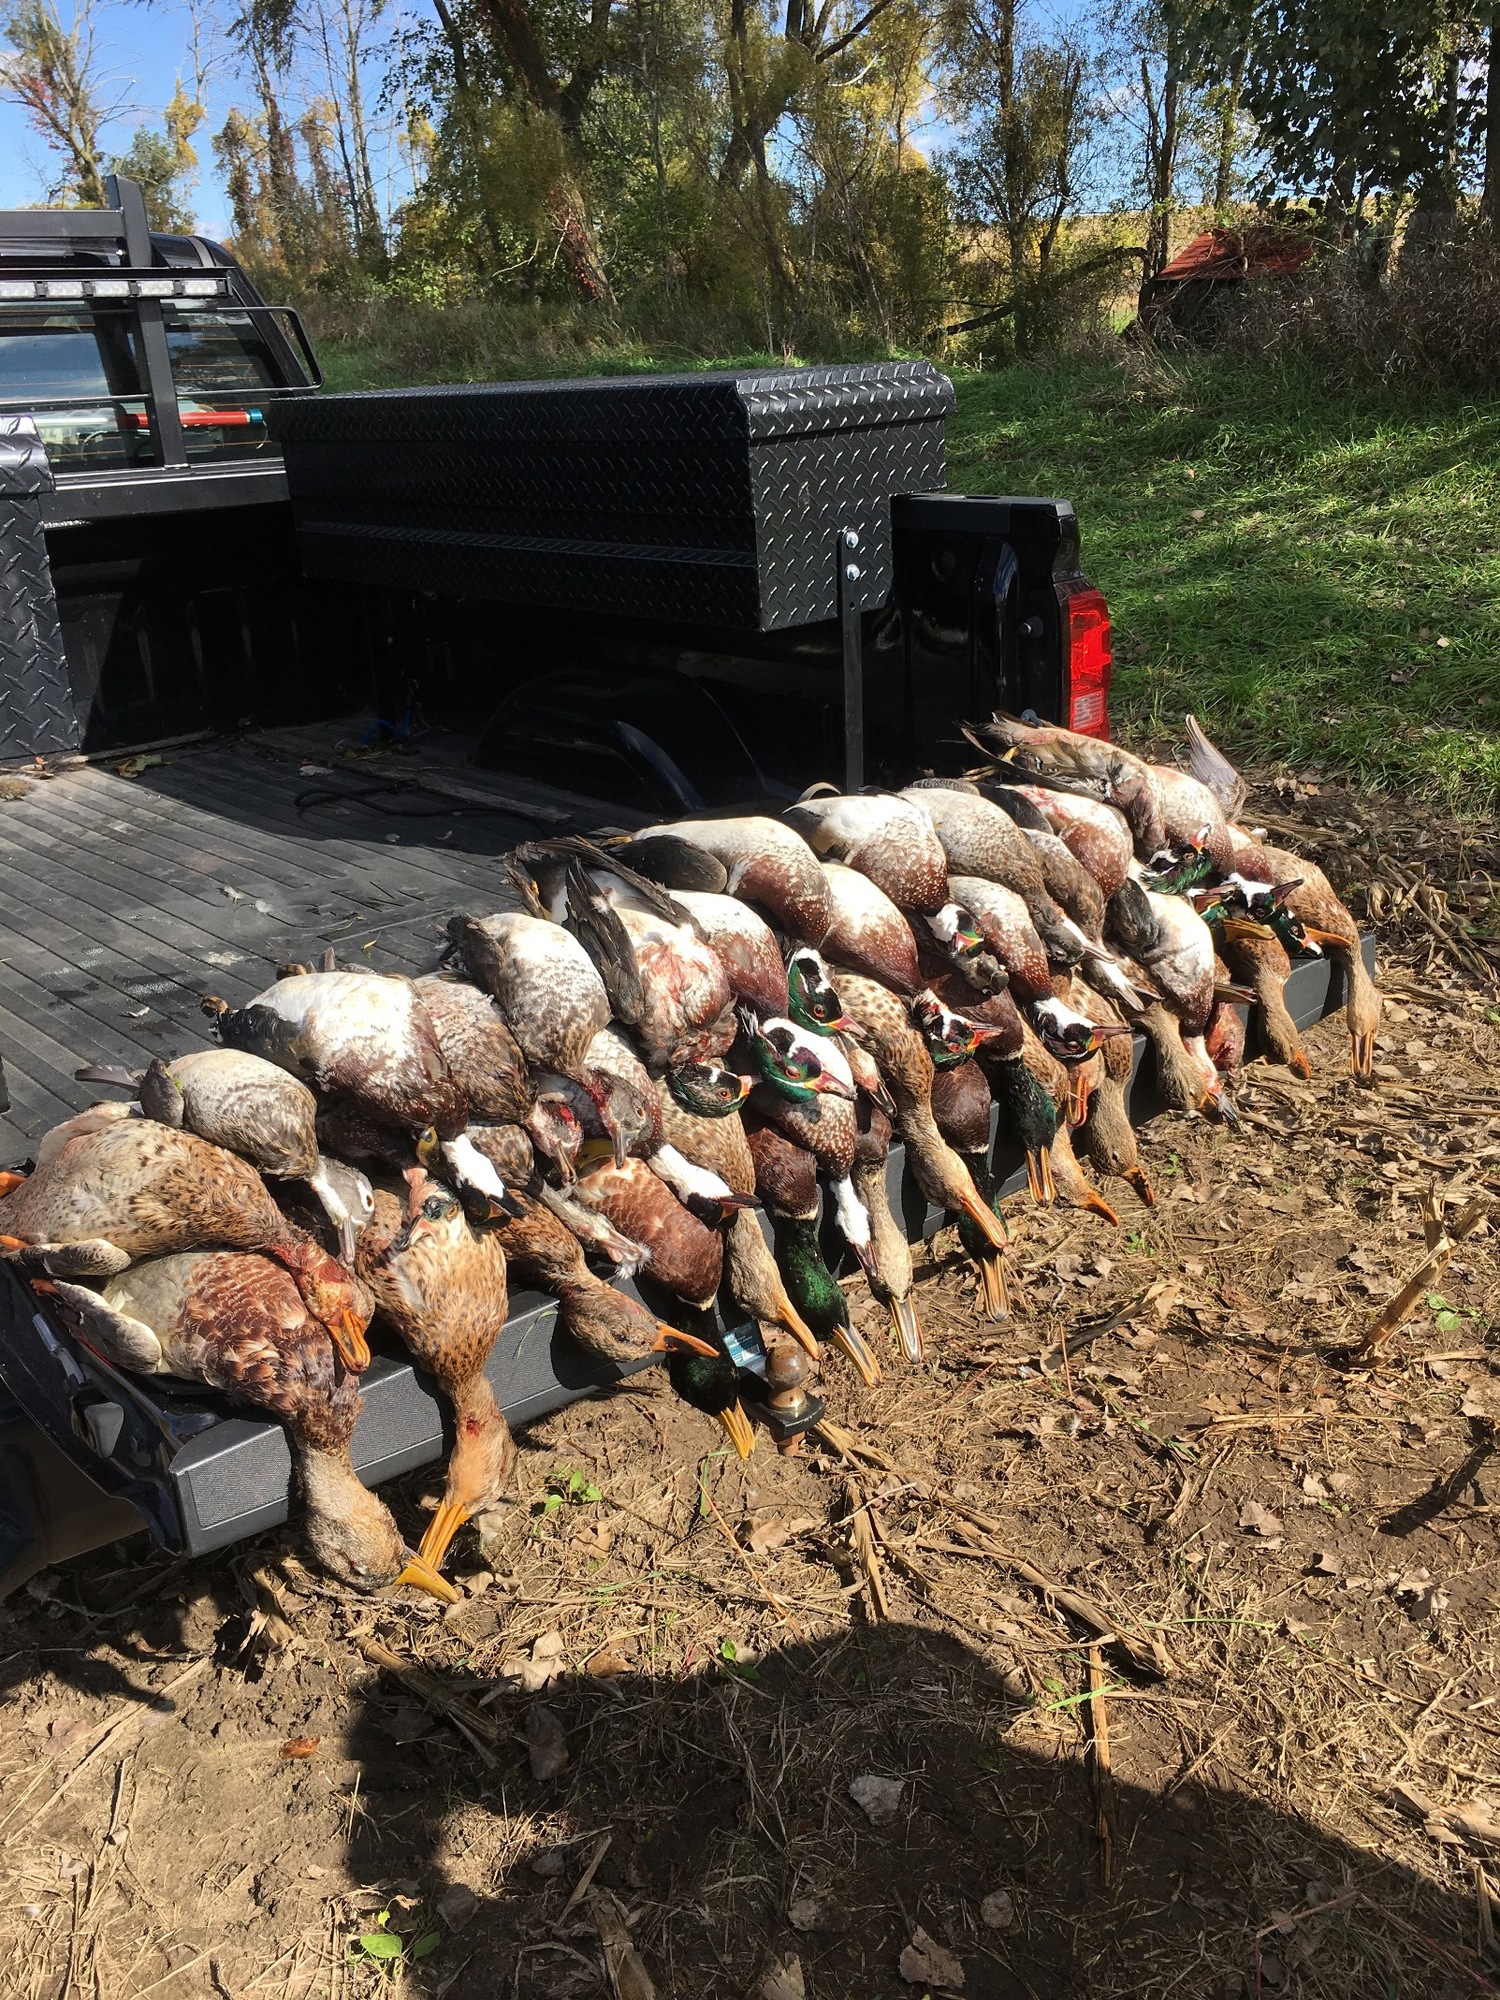 Nearly 60 mallards and wood ducks were shot during last weekend’s duck opener in Ottawa County. Four men from that area were ticketed.